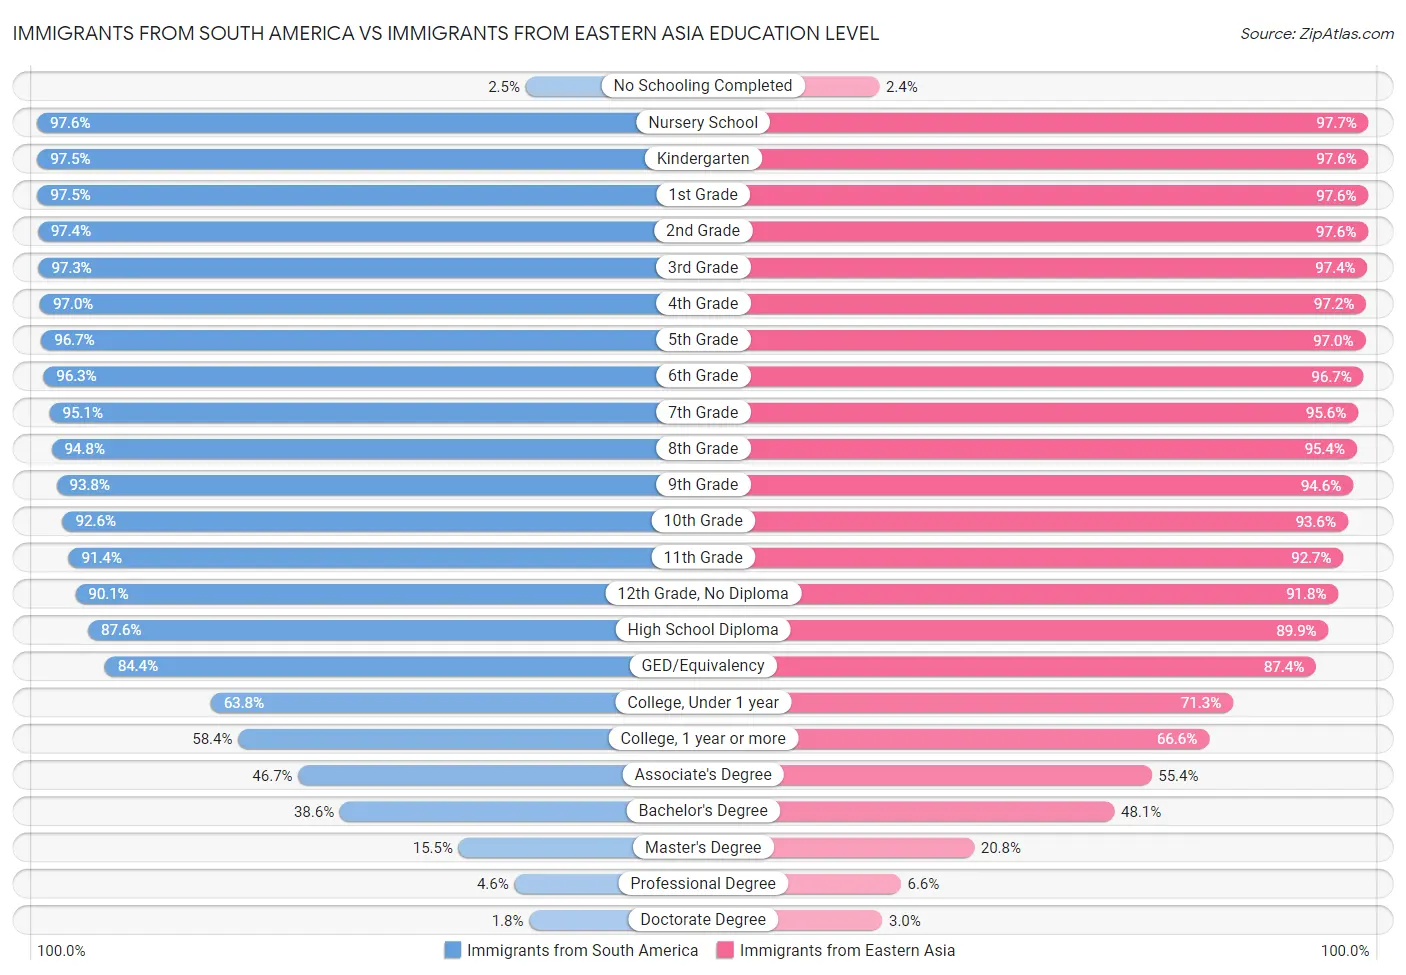 Immigrants from South America vs Immigrants from Eastern Asia Education Level